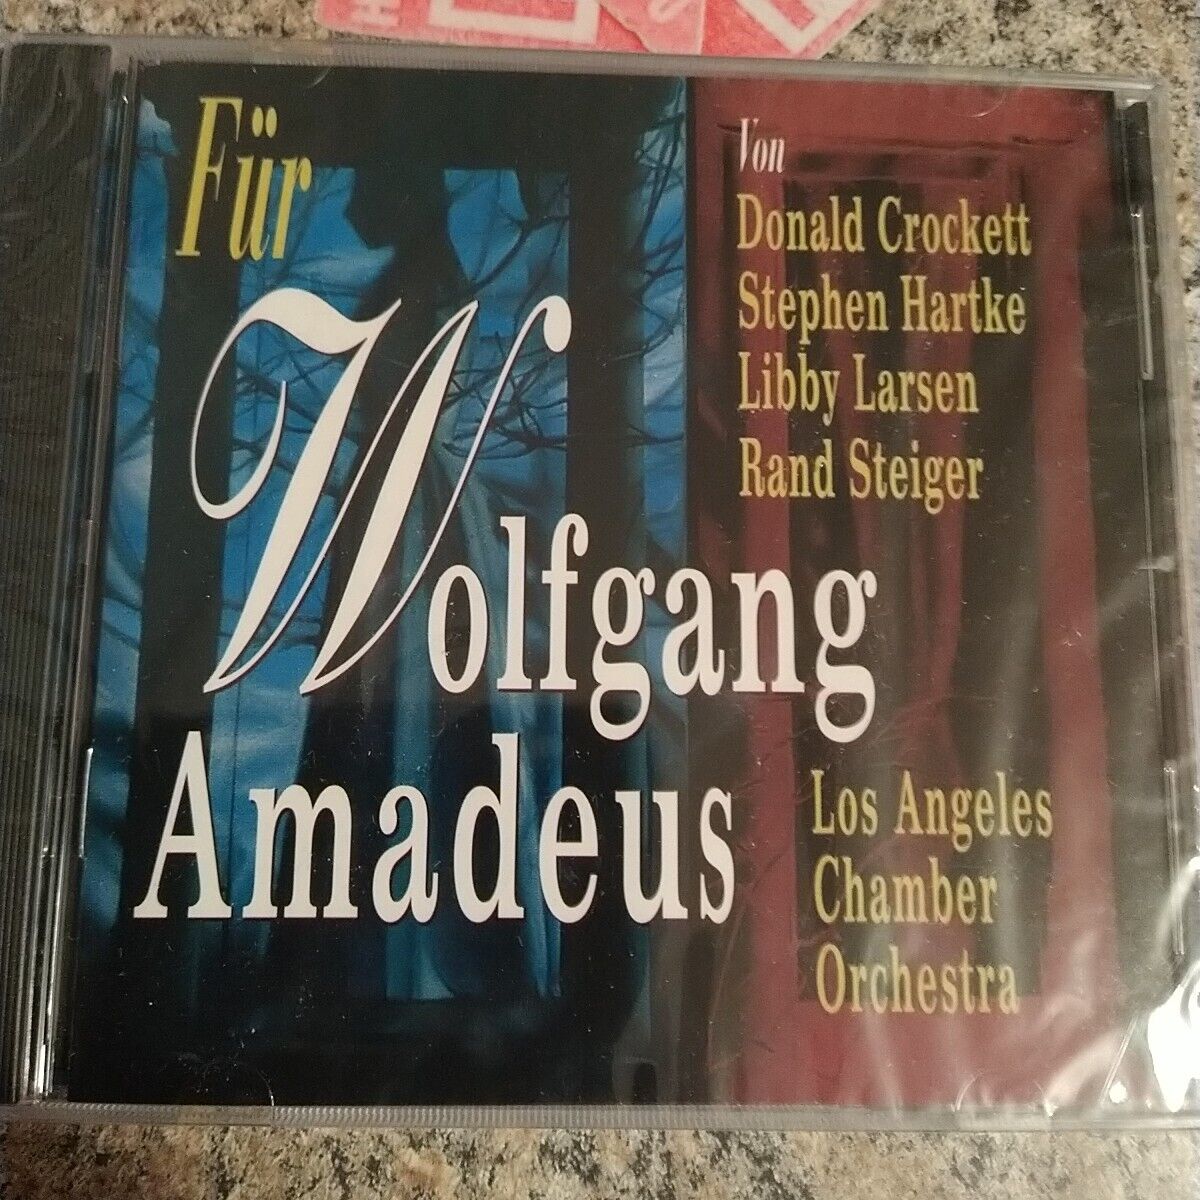 Fur Wolfgang Amadeus Los Angeles Chamber Orchestra CD [NEW SEALED]